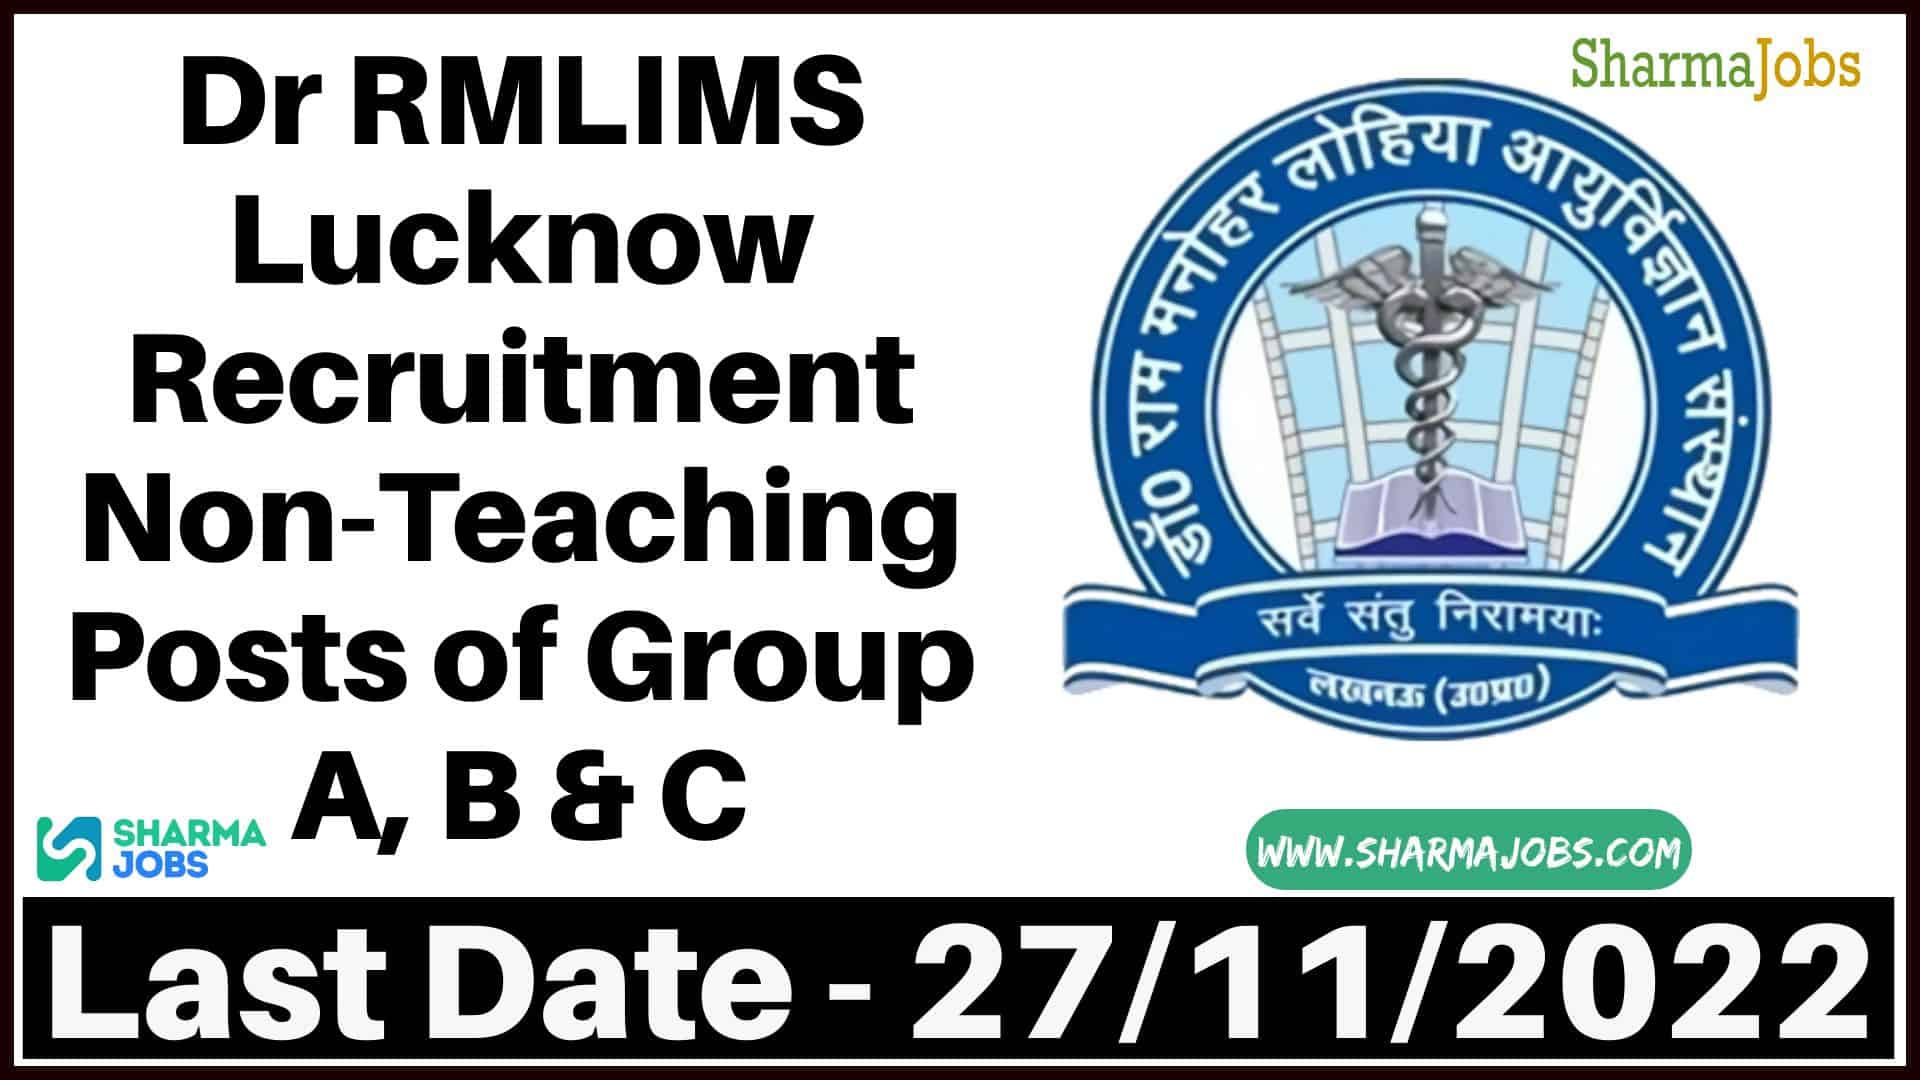 Dr. RMLIMS Lucknow Various Post Online Form 2022 1